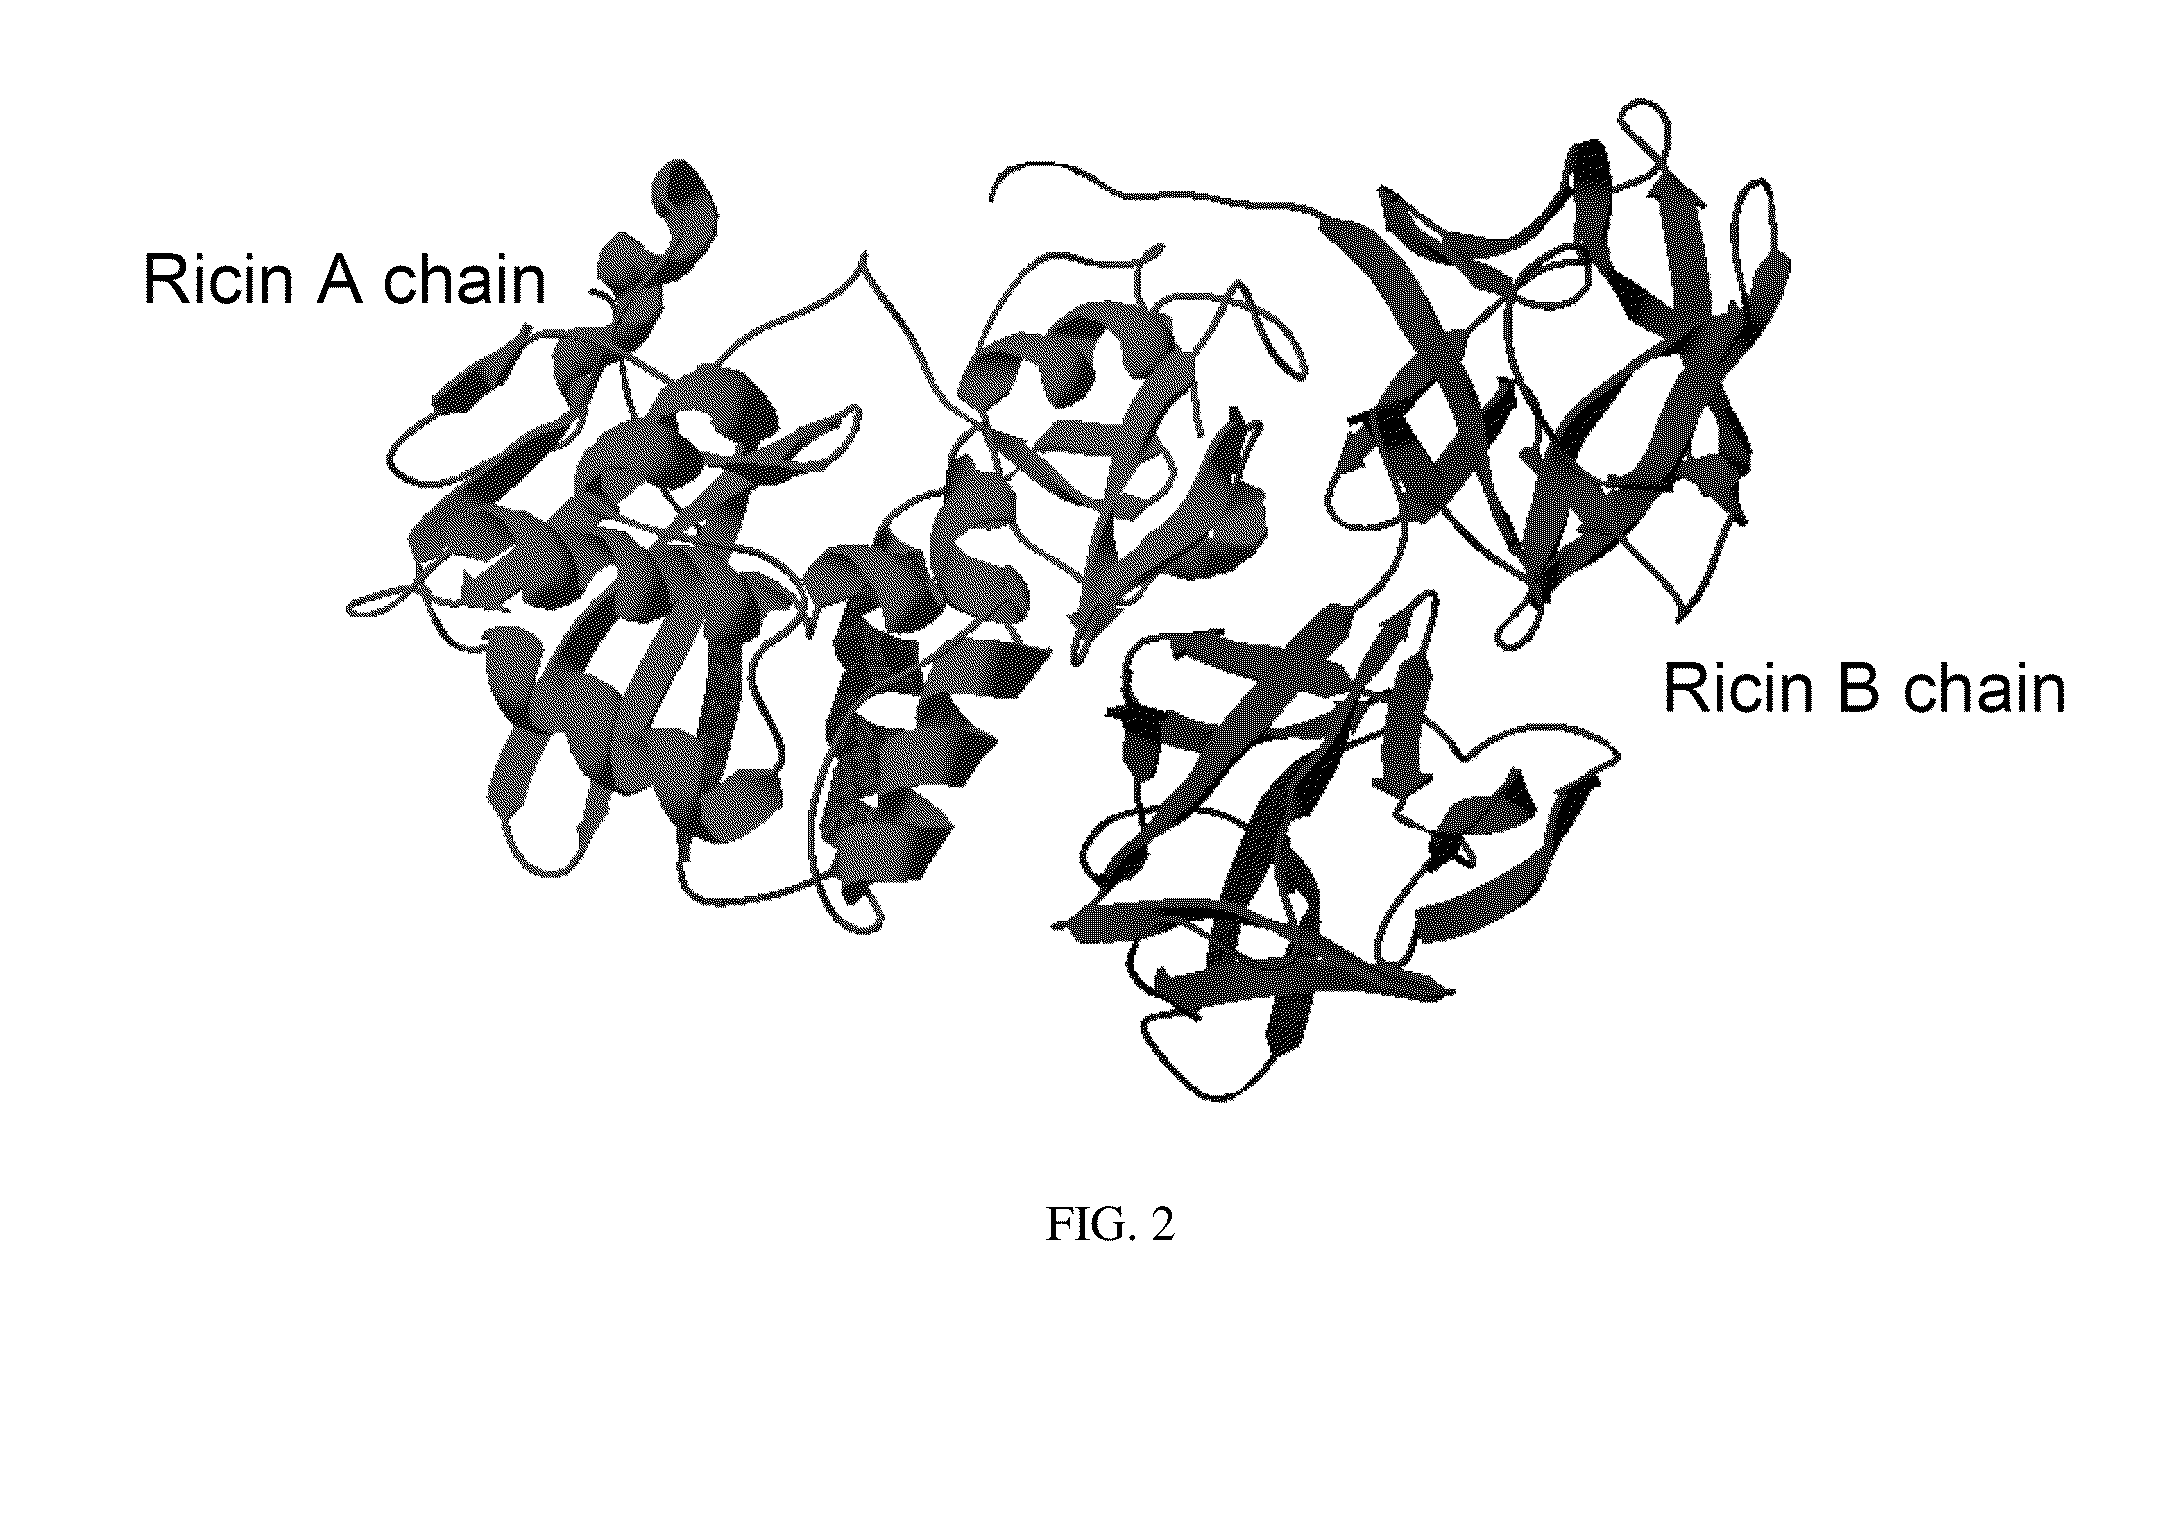 Methods and Systems for the Detection of Ricin and Other Ribosome Inactivating Proteins